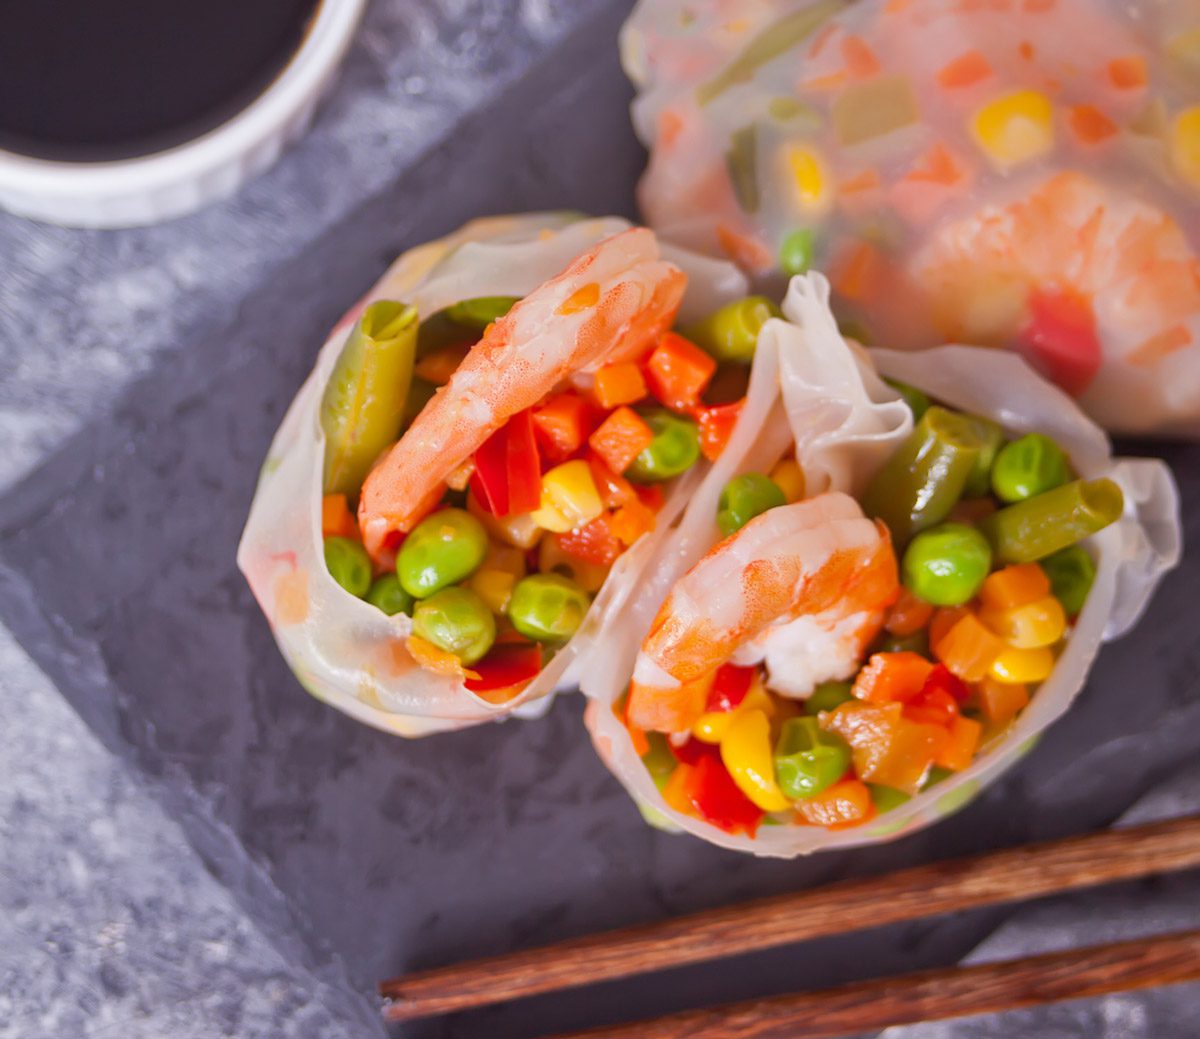 Veggie wraps are light and airy. Pair with an Asian sauce for extra flavor.